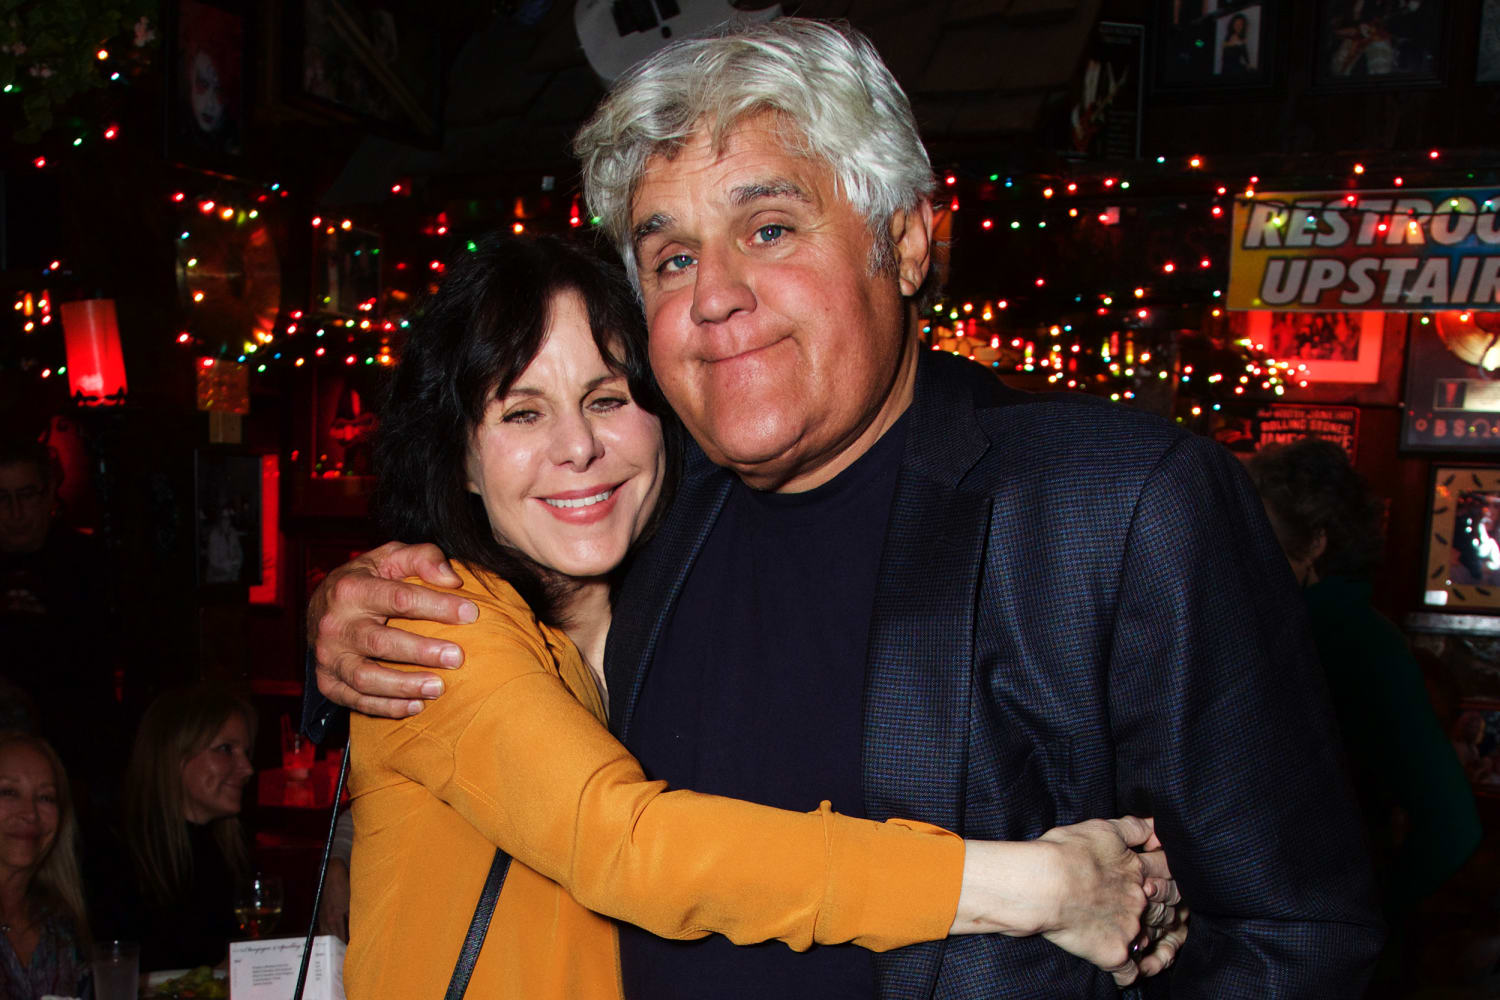 Jay Leno's wife “sometimes doesn't know her husband” after he was diagnosed with dementia, court documents say